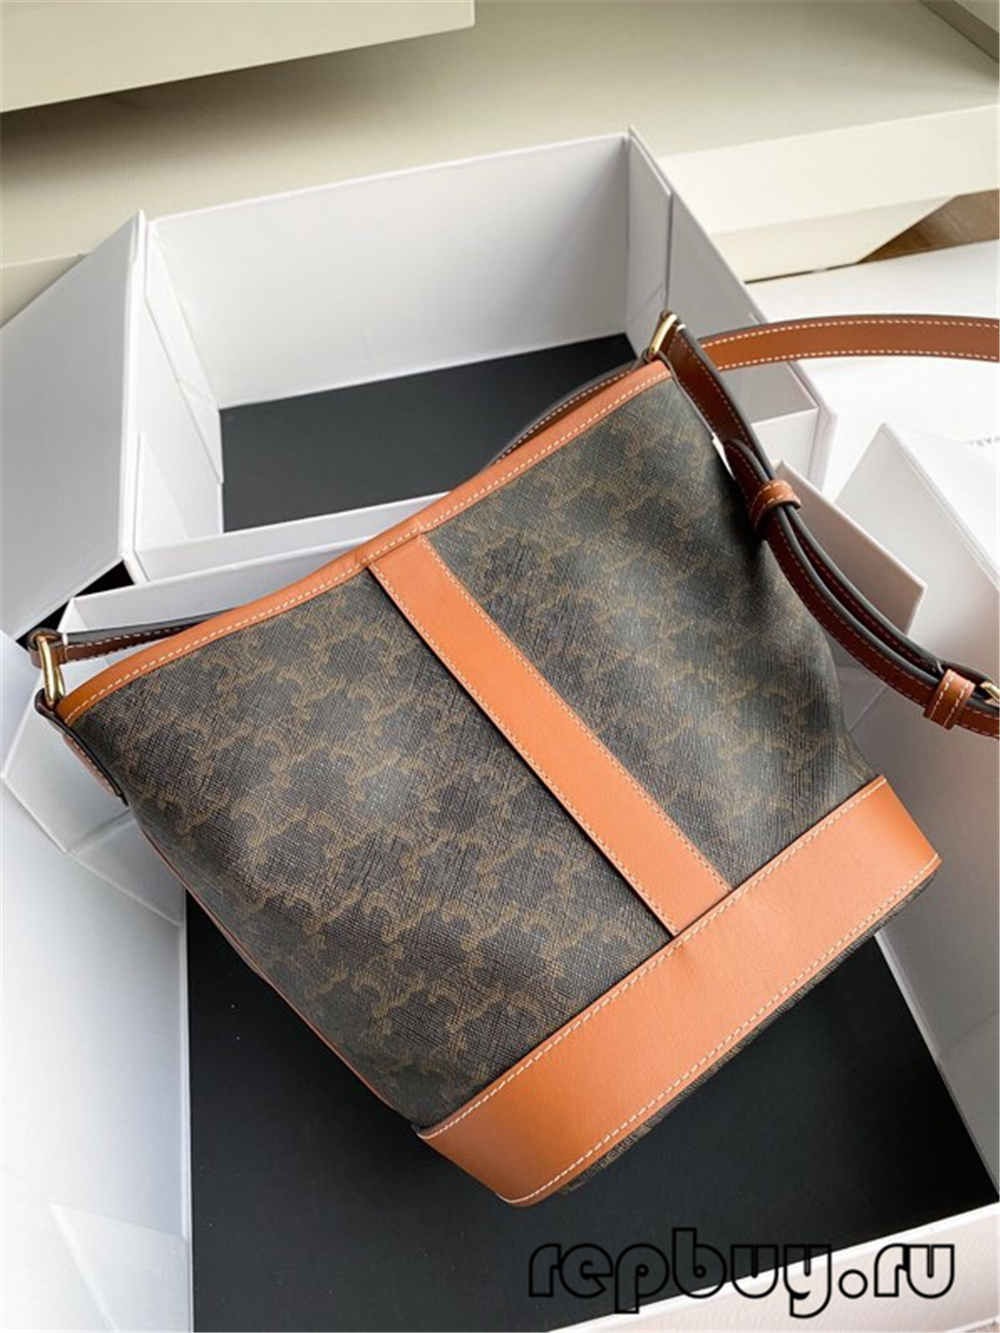 Top 8 of the most worthwhile replica designer bags (2022 Updated)-Best Quality Fake designer Bag Review, Replica designer bag ru